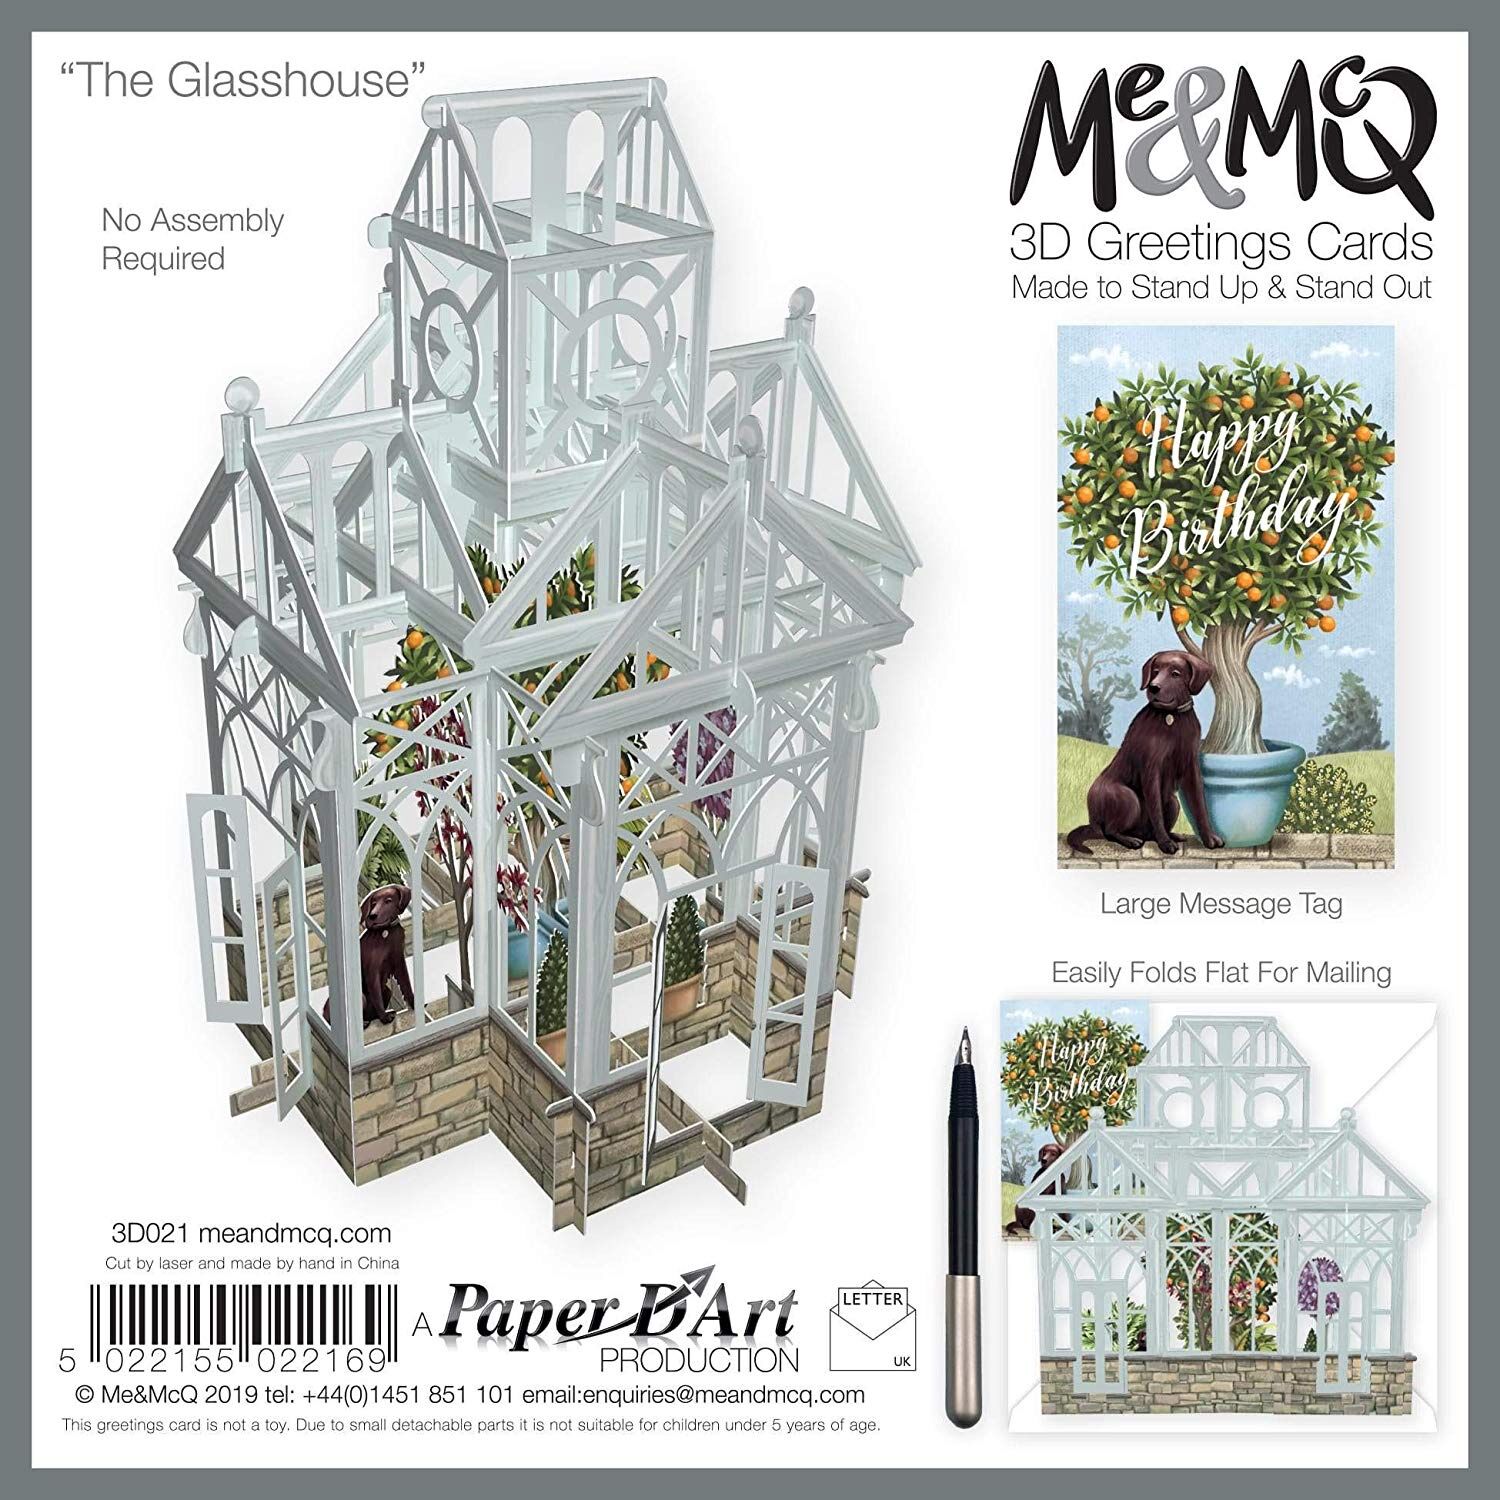 Card (3D Pop up): The Glasshouse